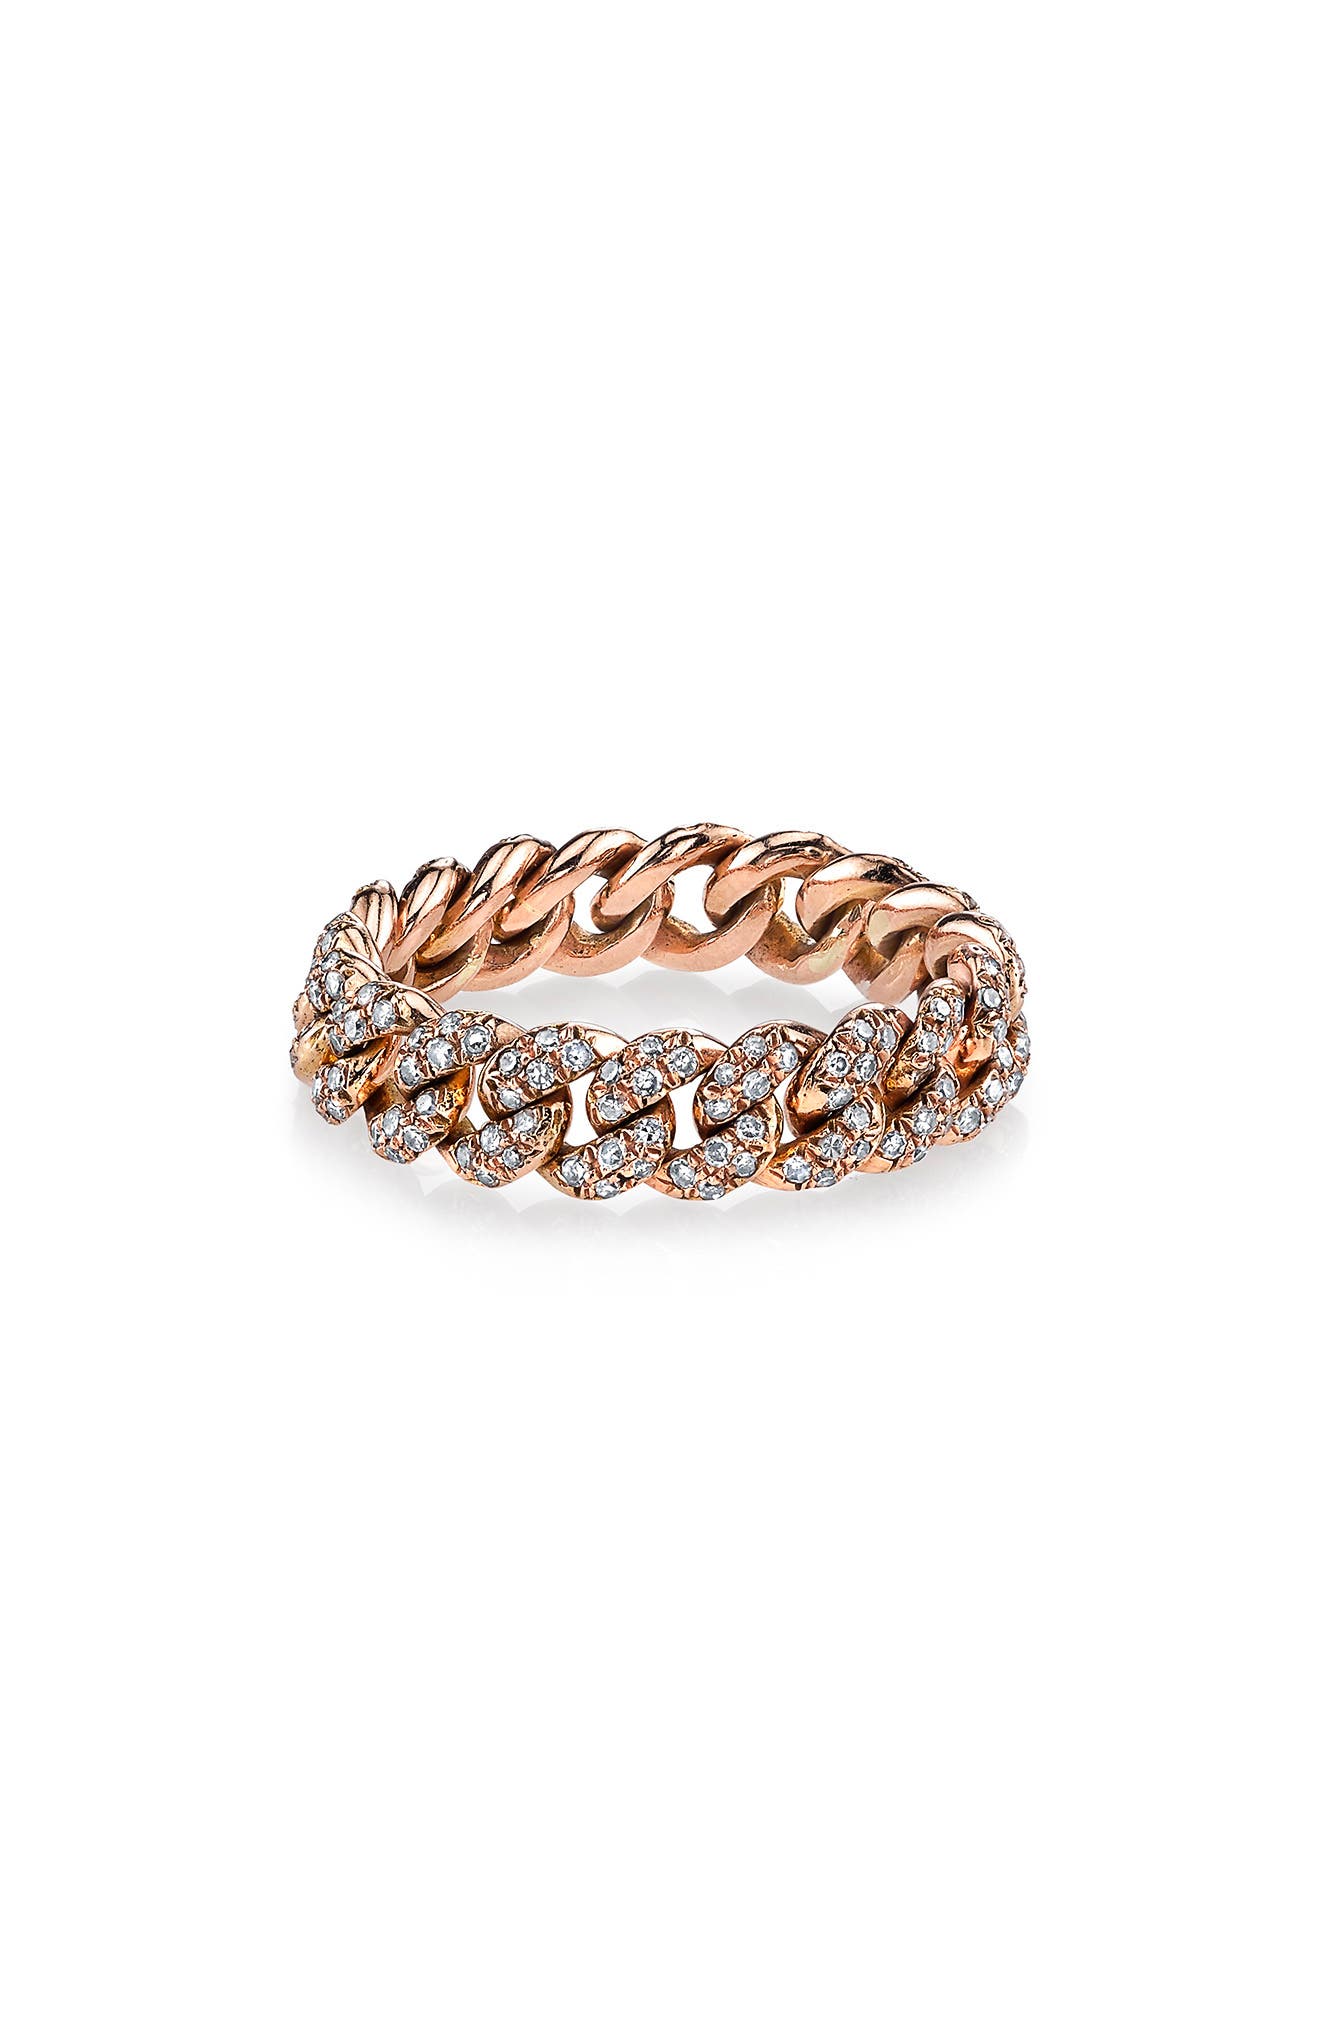 SHAY Essential Link Pave Diamond Band Ring in Rose Gold at Nordstrom, Size 7 Us